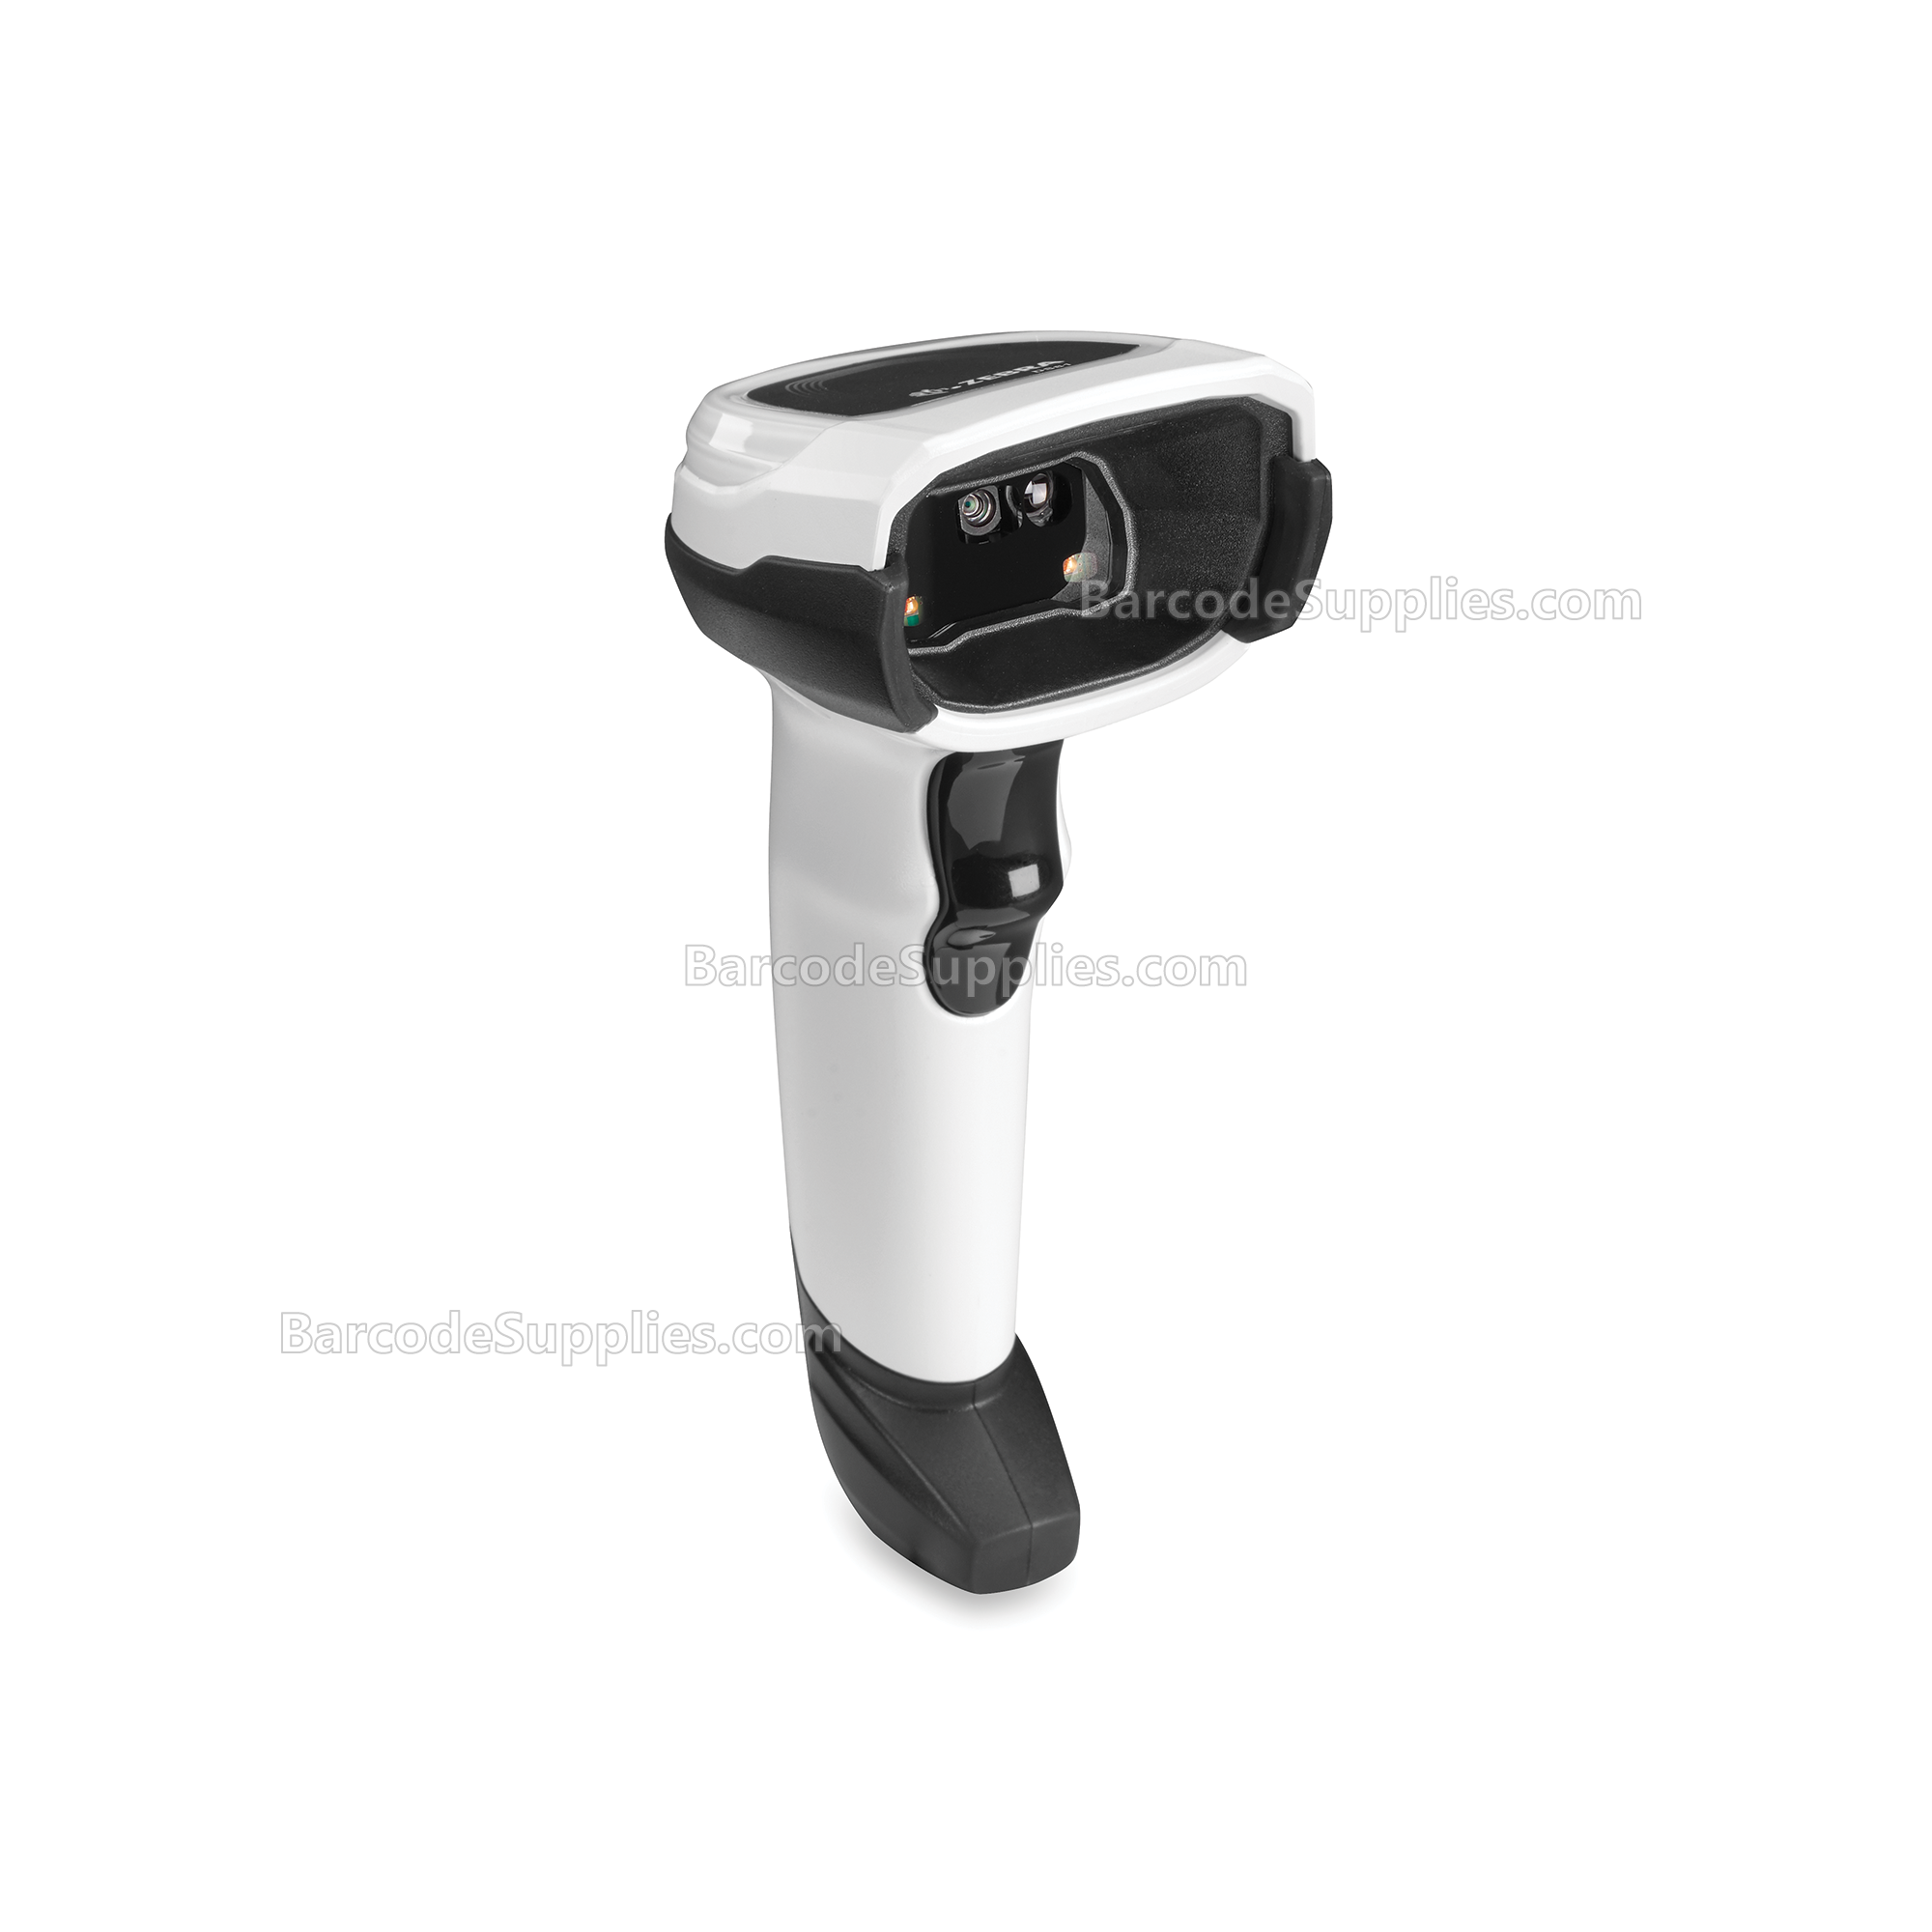 DS8108-DL White (with Stand) USB KIT: DS8108-DL00006ZZWW Scanner, CBA-U21-S07ZBR Shielded USB Cable, 20-71043-04R Stand